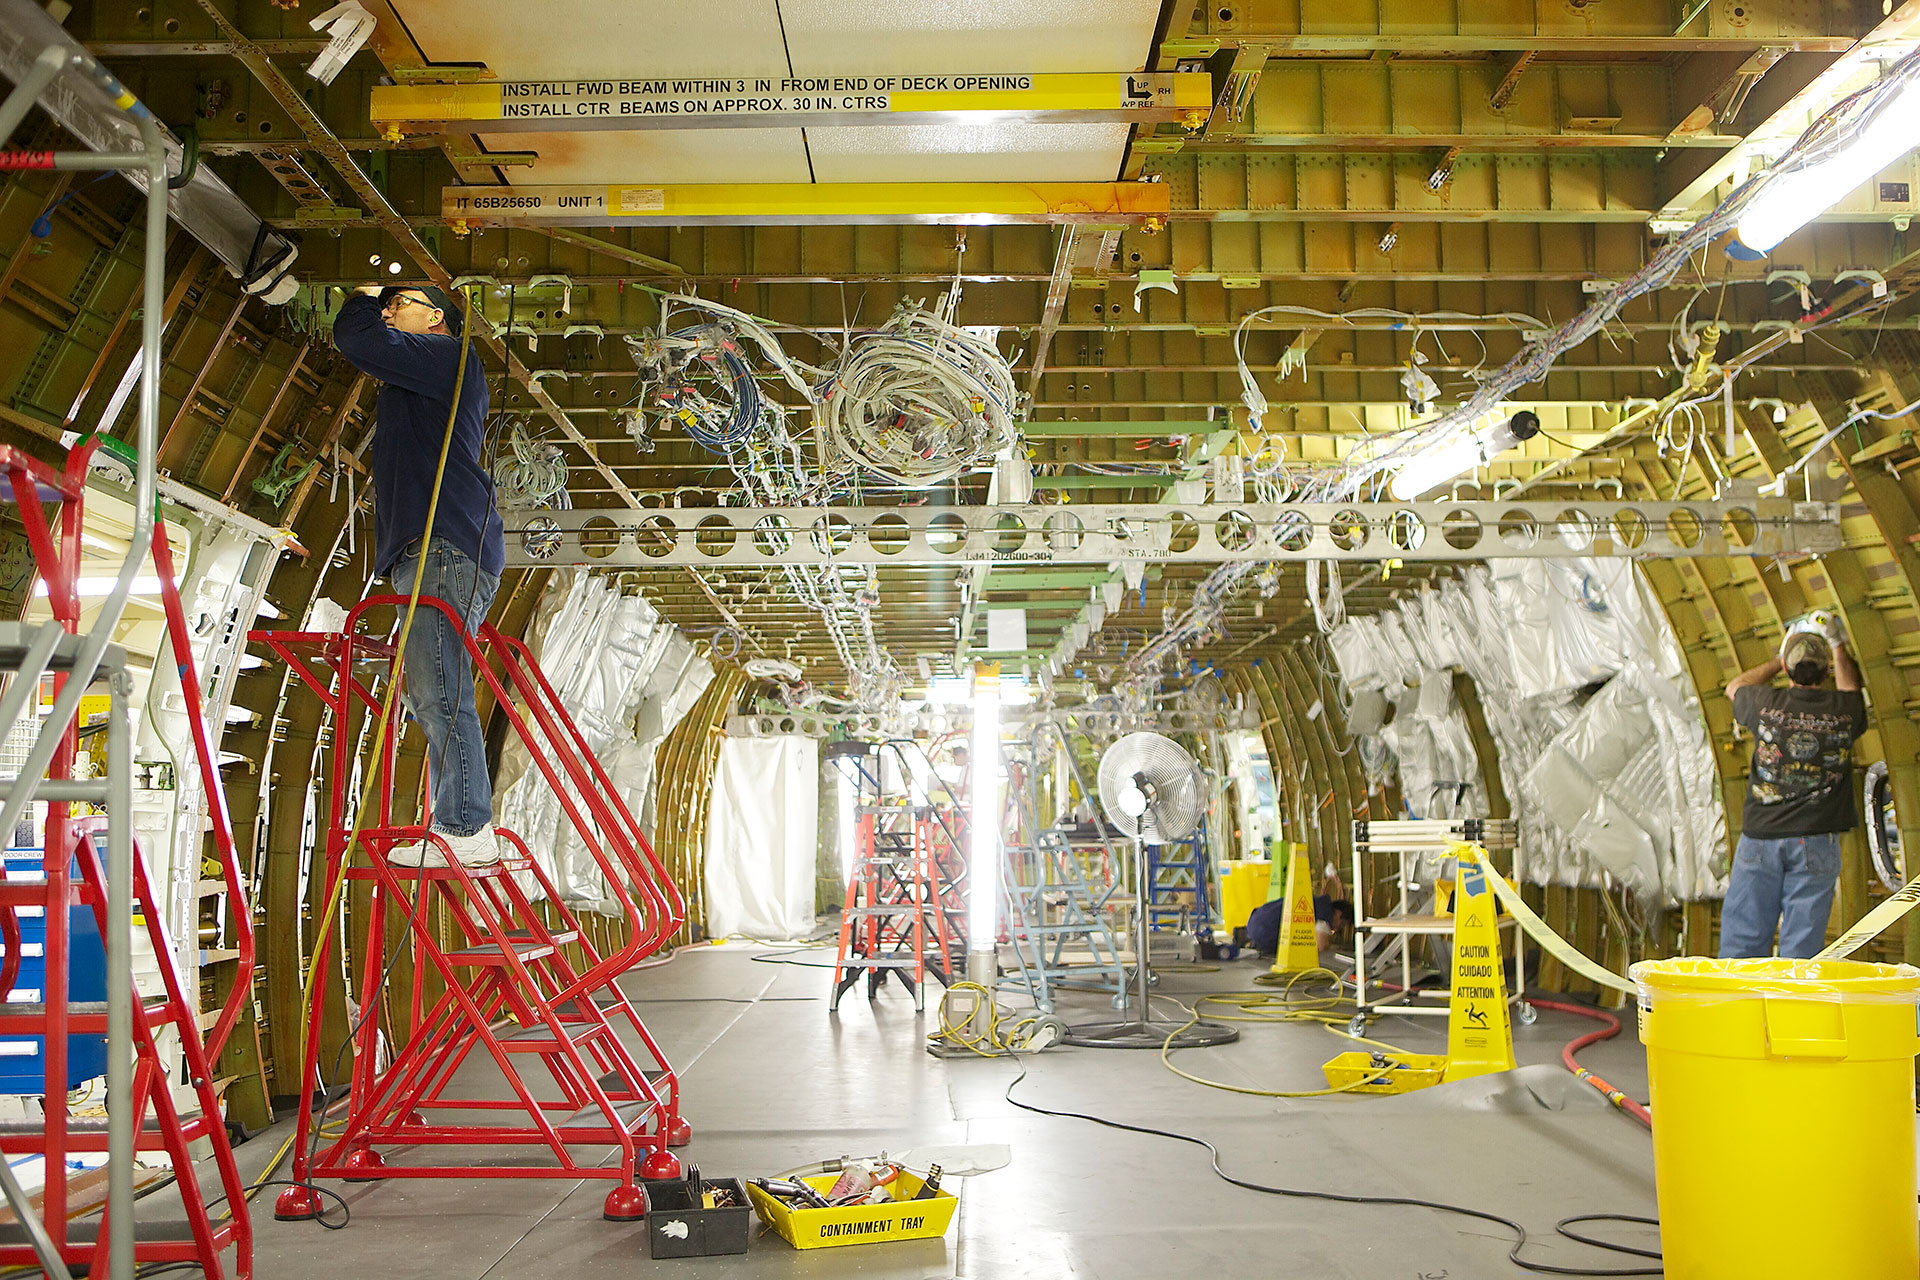 Boeing employees work on the fuselage section of the 747-8 Intercontinental airliner, Boeing's new passenger jet at the Boeing factory February 12, 2011 in Everett, Washington.  Stephen Brashear/Getty Images/File